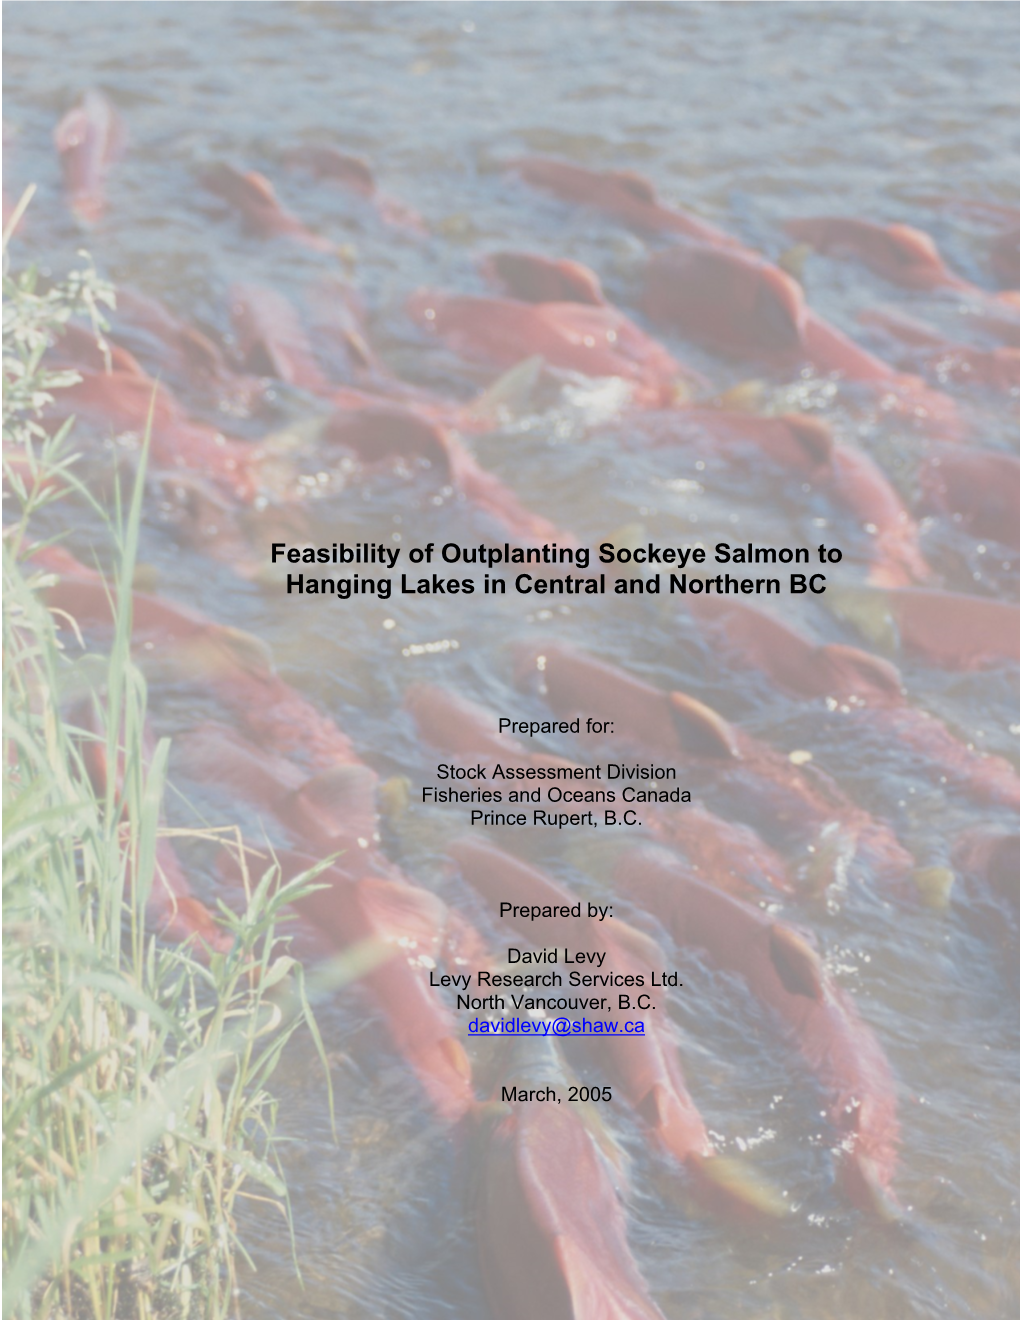 Feasibility of Outplanting Sockeye Salmon to Hanging Lakes in Central and Northern BC